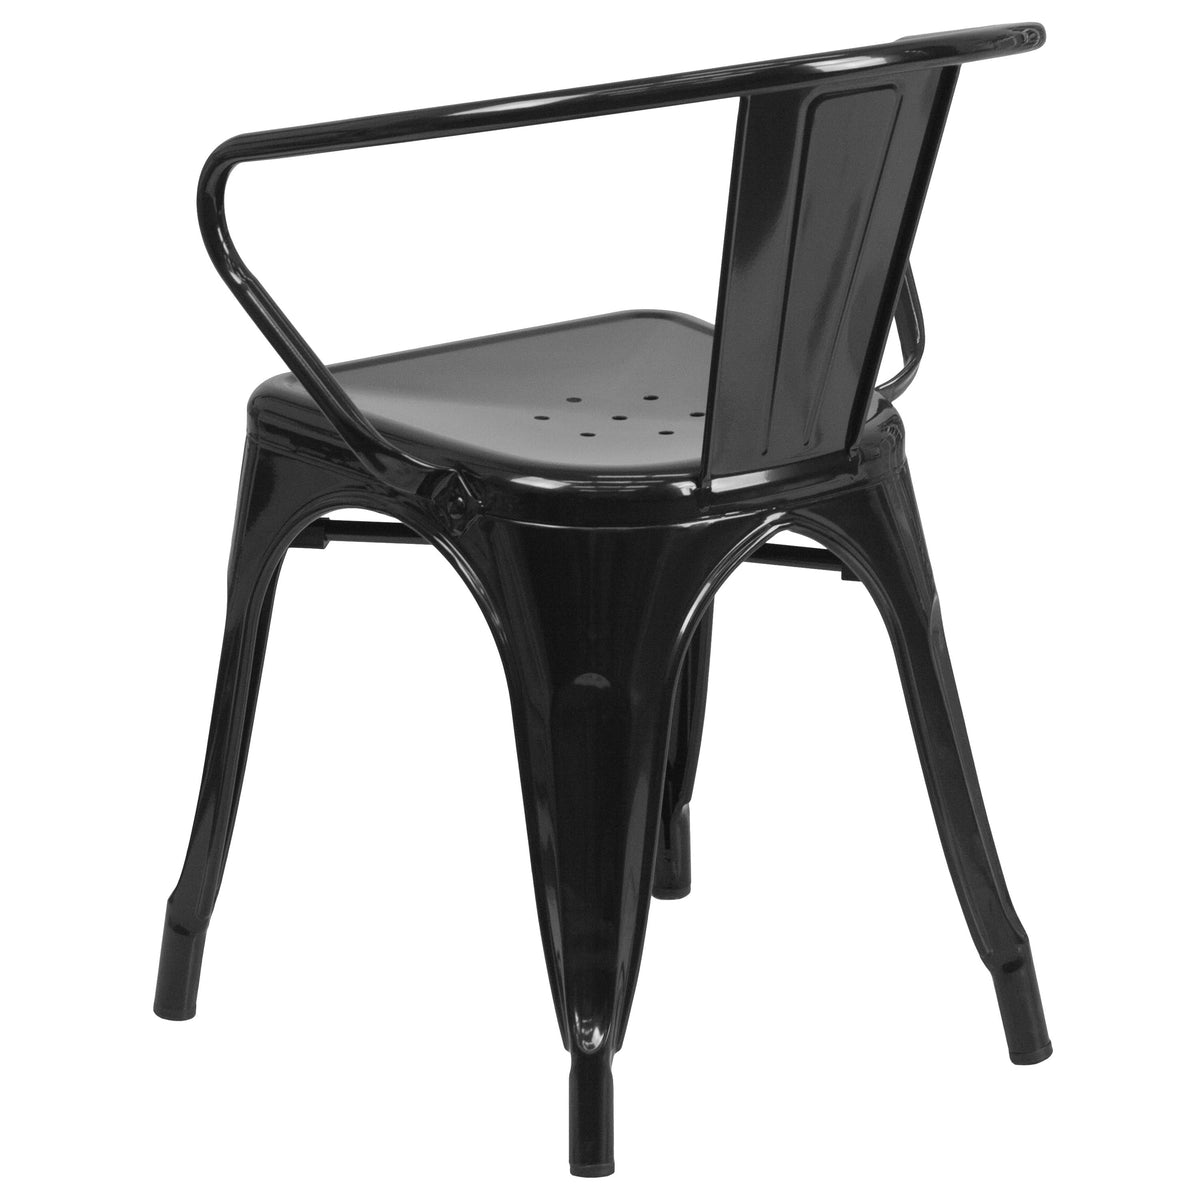 Black |#| Black Metal Indoor-Outdoor Chair with Arms - Restaurant Chair - Bistro Chair